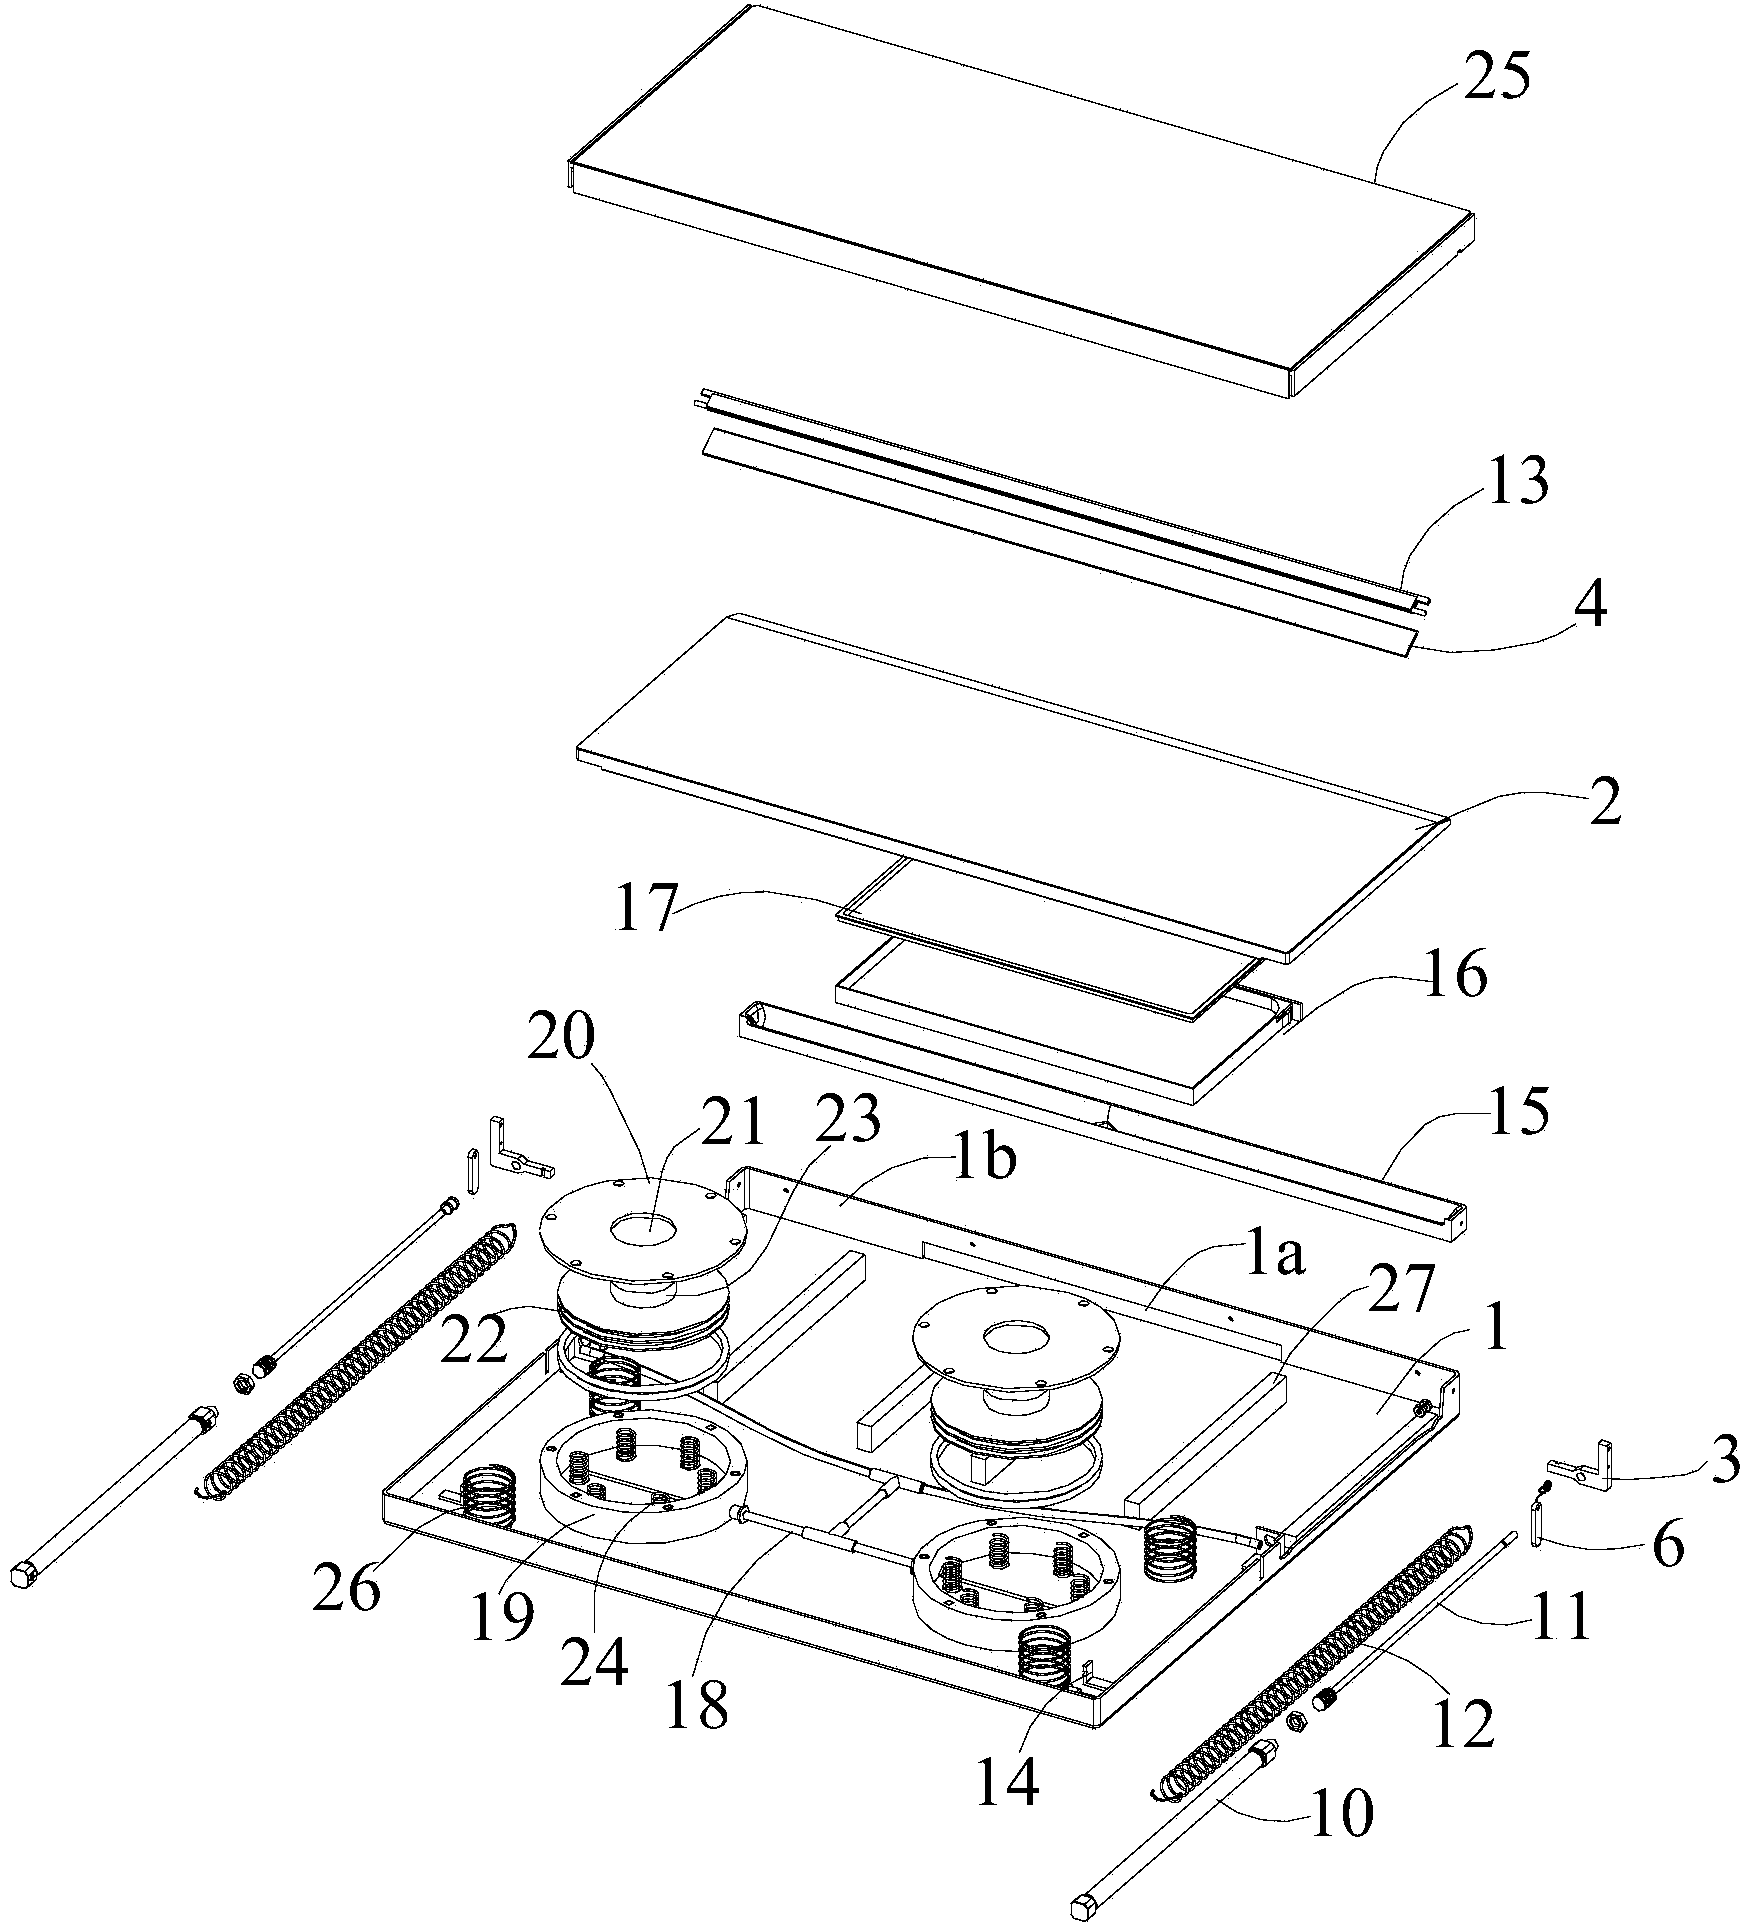 Full-automatic intelligent cleaning device